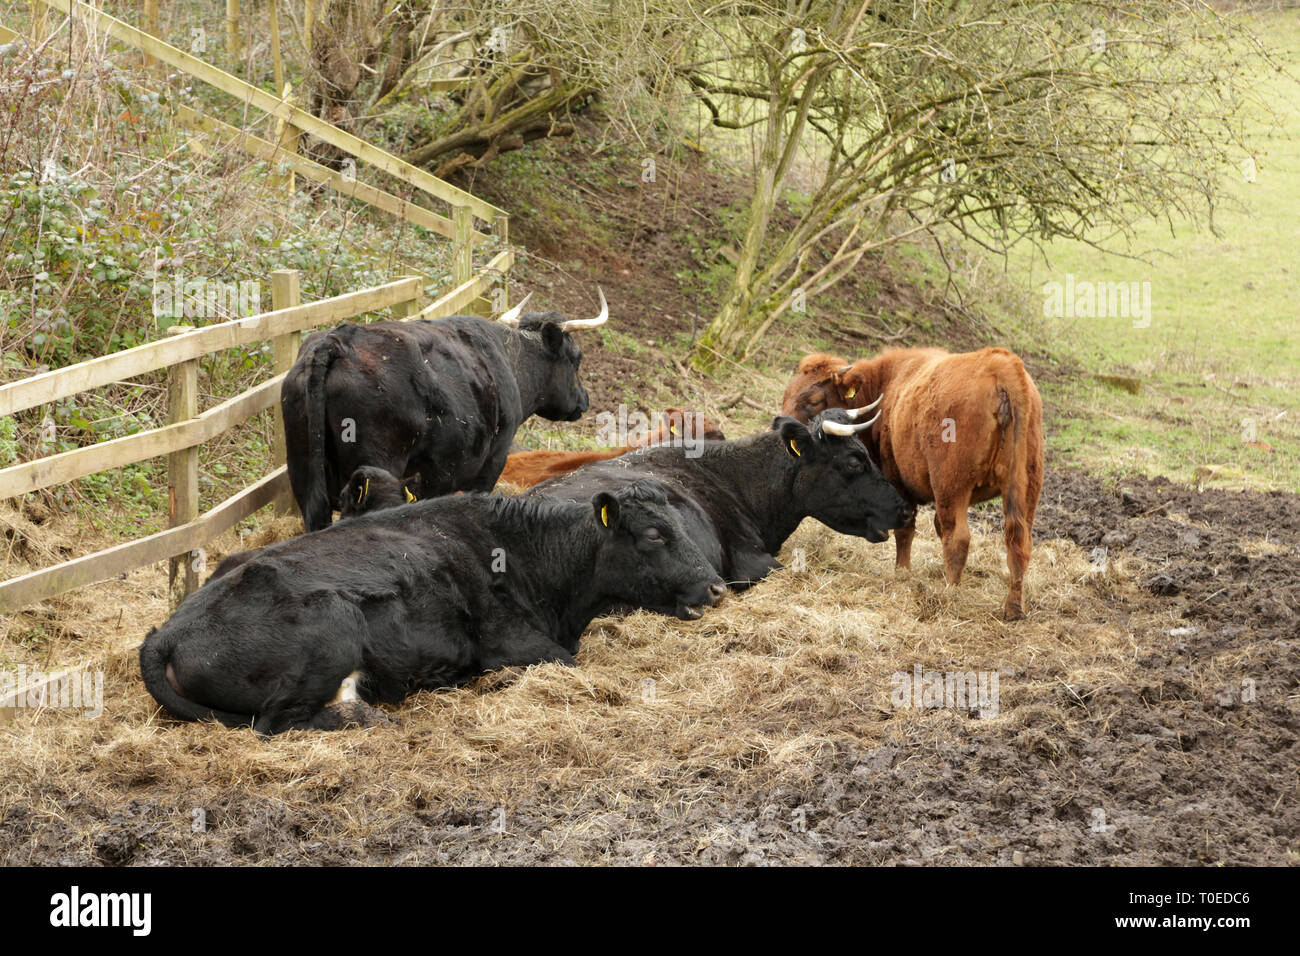 Dexter cattle in a muddy field in Worcestershire, UK. Stock Photo